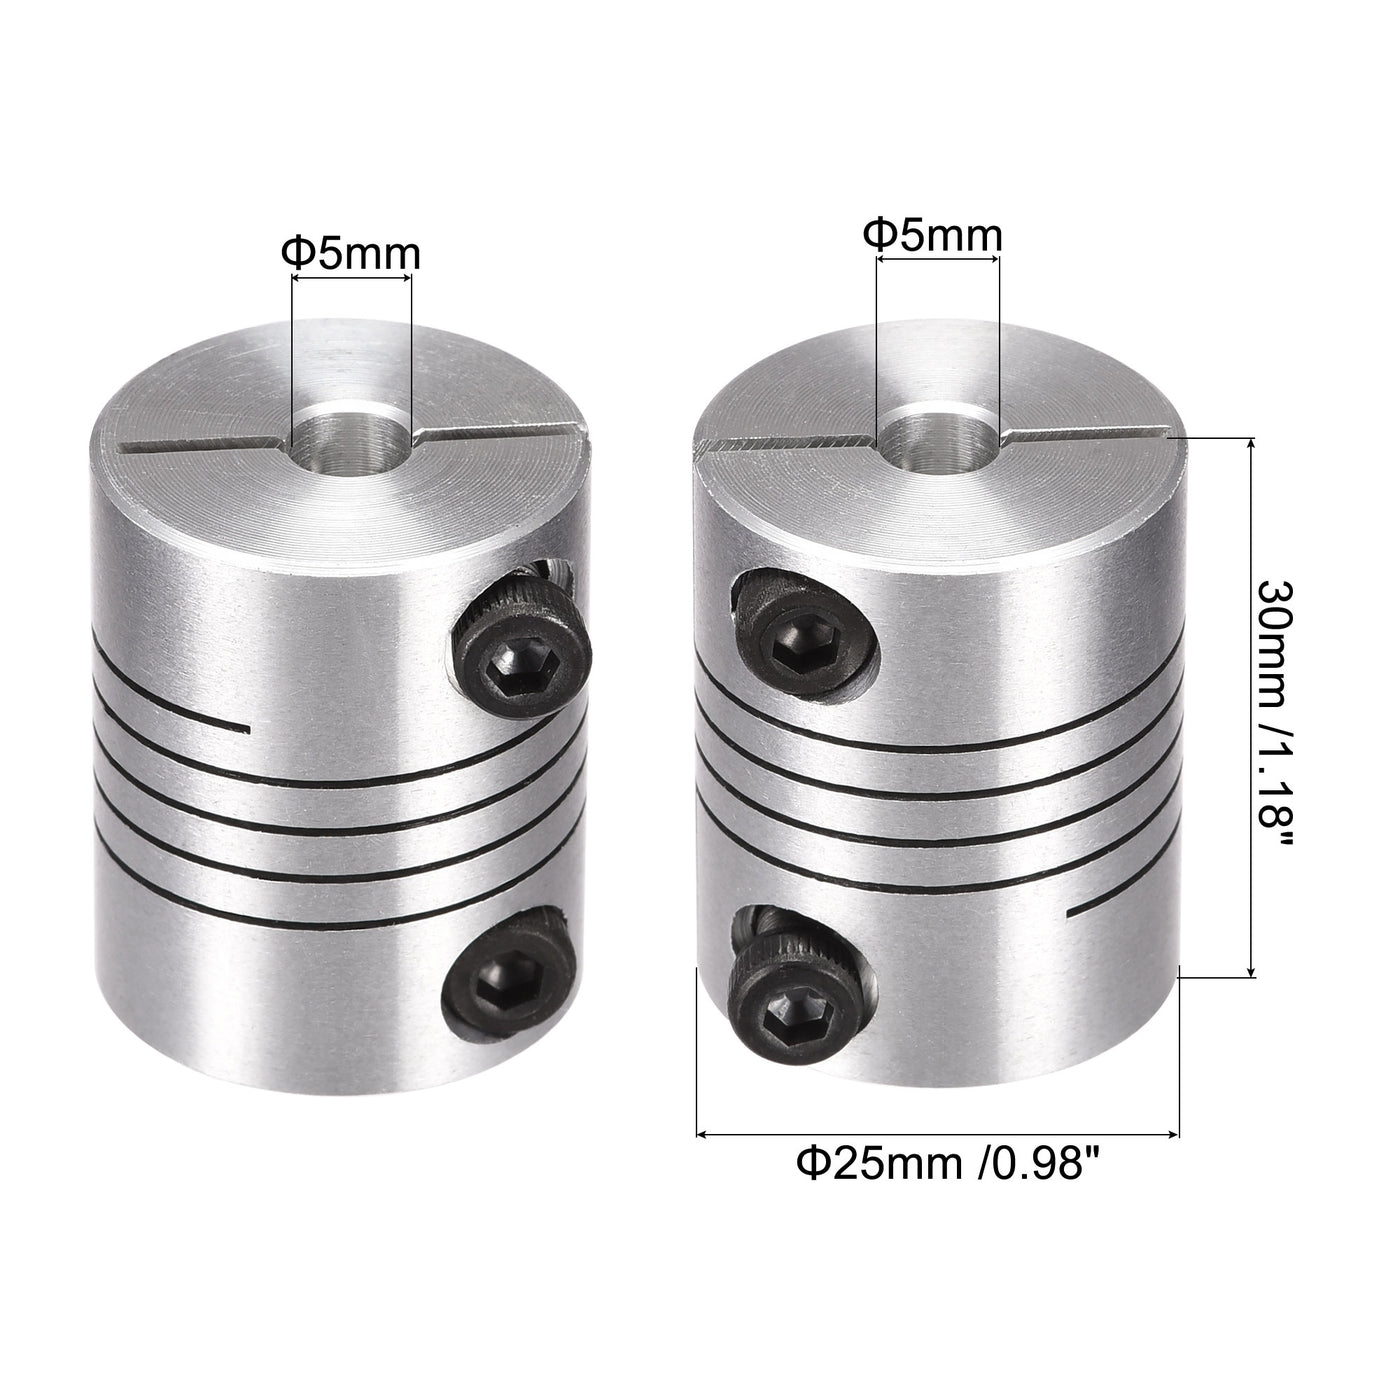 uxcell Uxcell 2PCS Motor Shaft 5mm to 5mm Helical Beam Coupler Coupling 25mm Dia 30mm Length